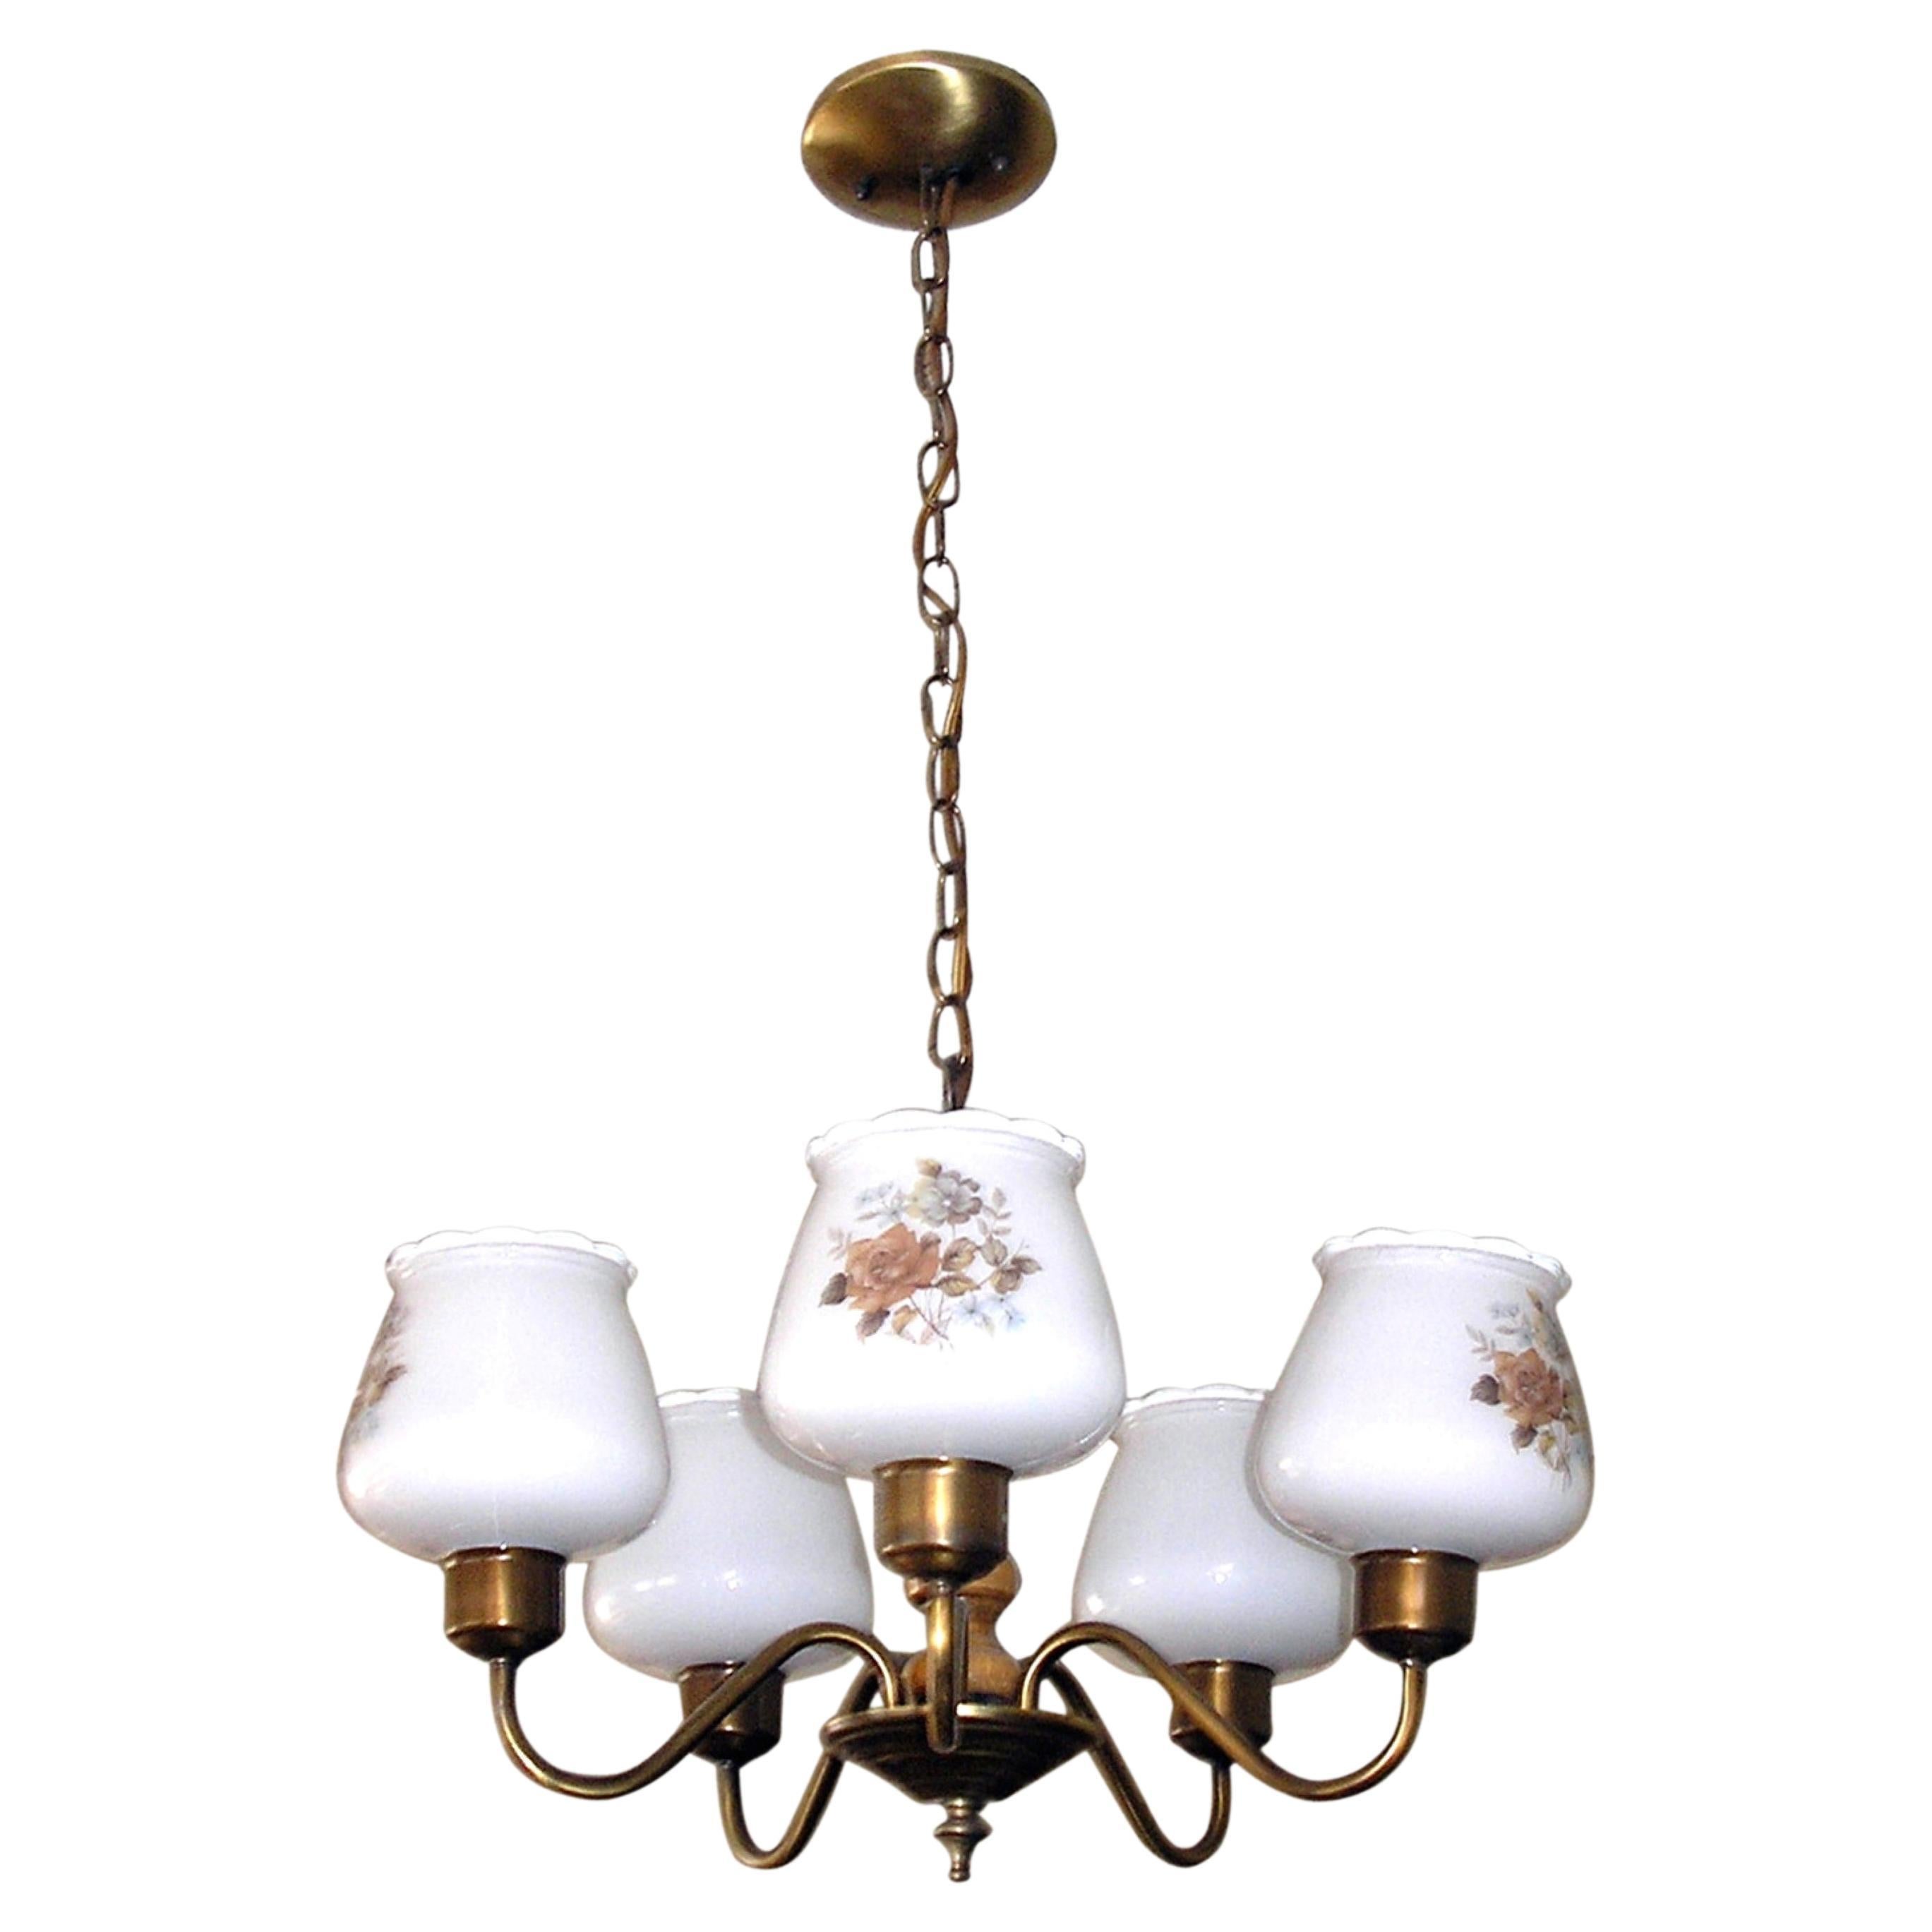 5 Arm Wood Chandelier Floral Glass Shades Qty Available For Sale